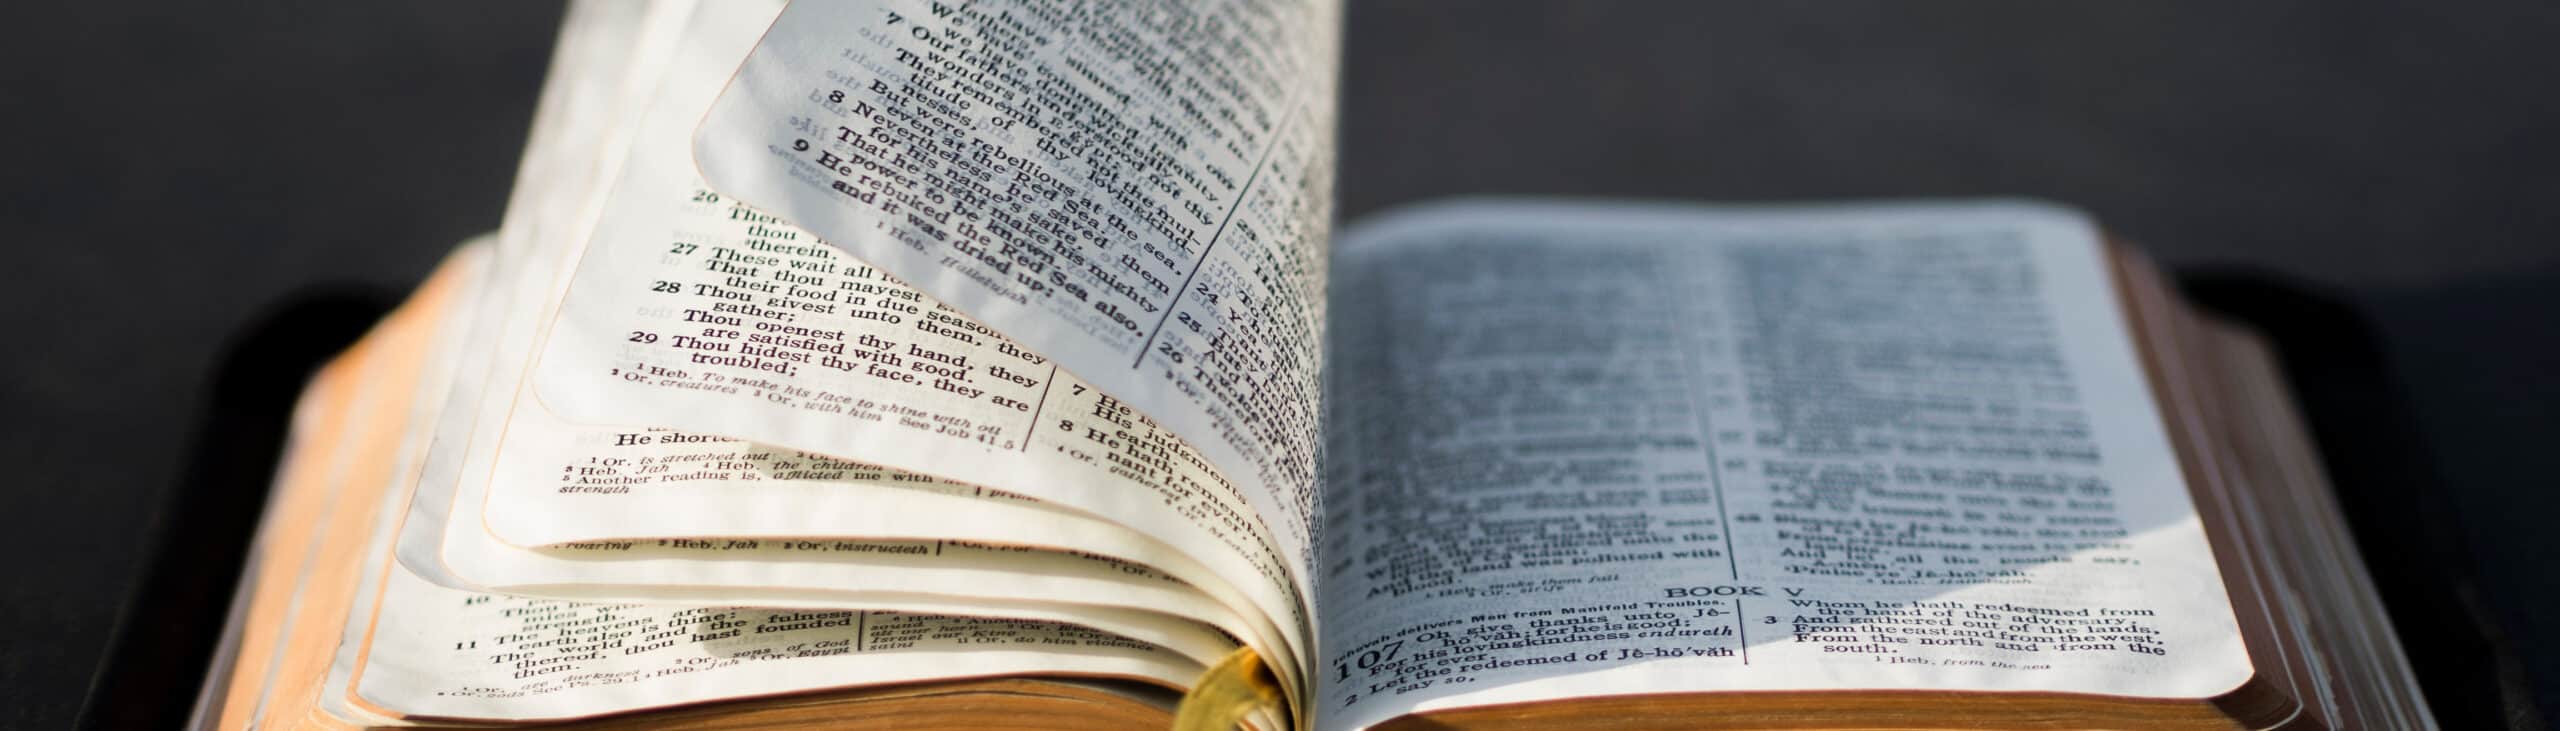 Decorative header photo of an open Bible with the pages being turned